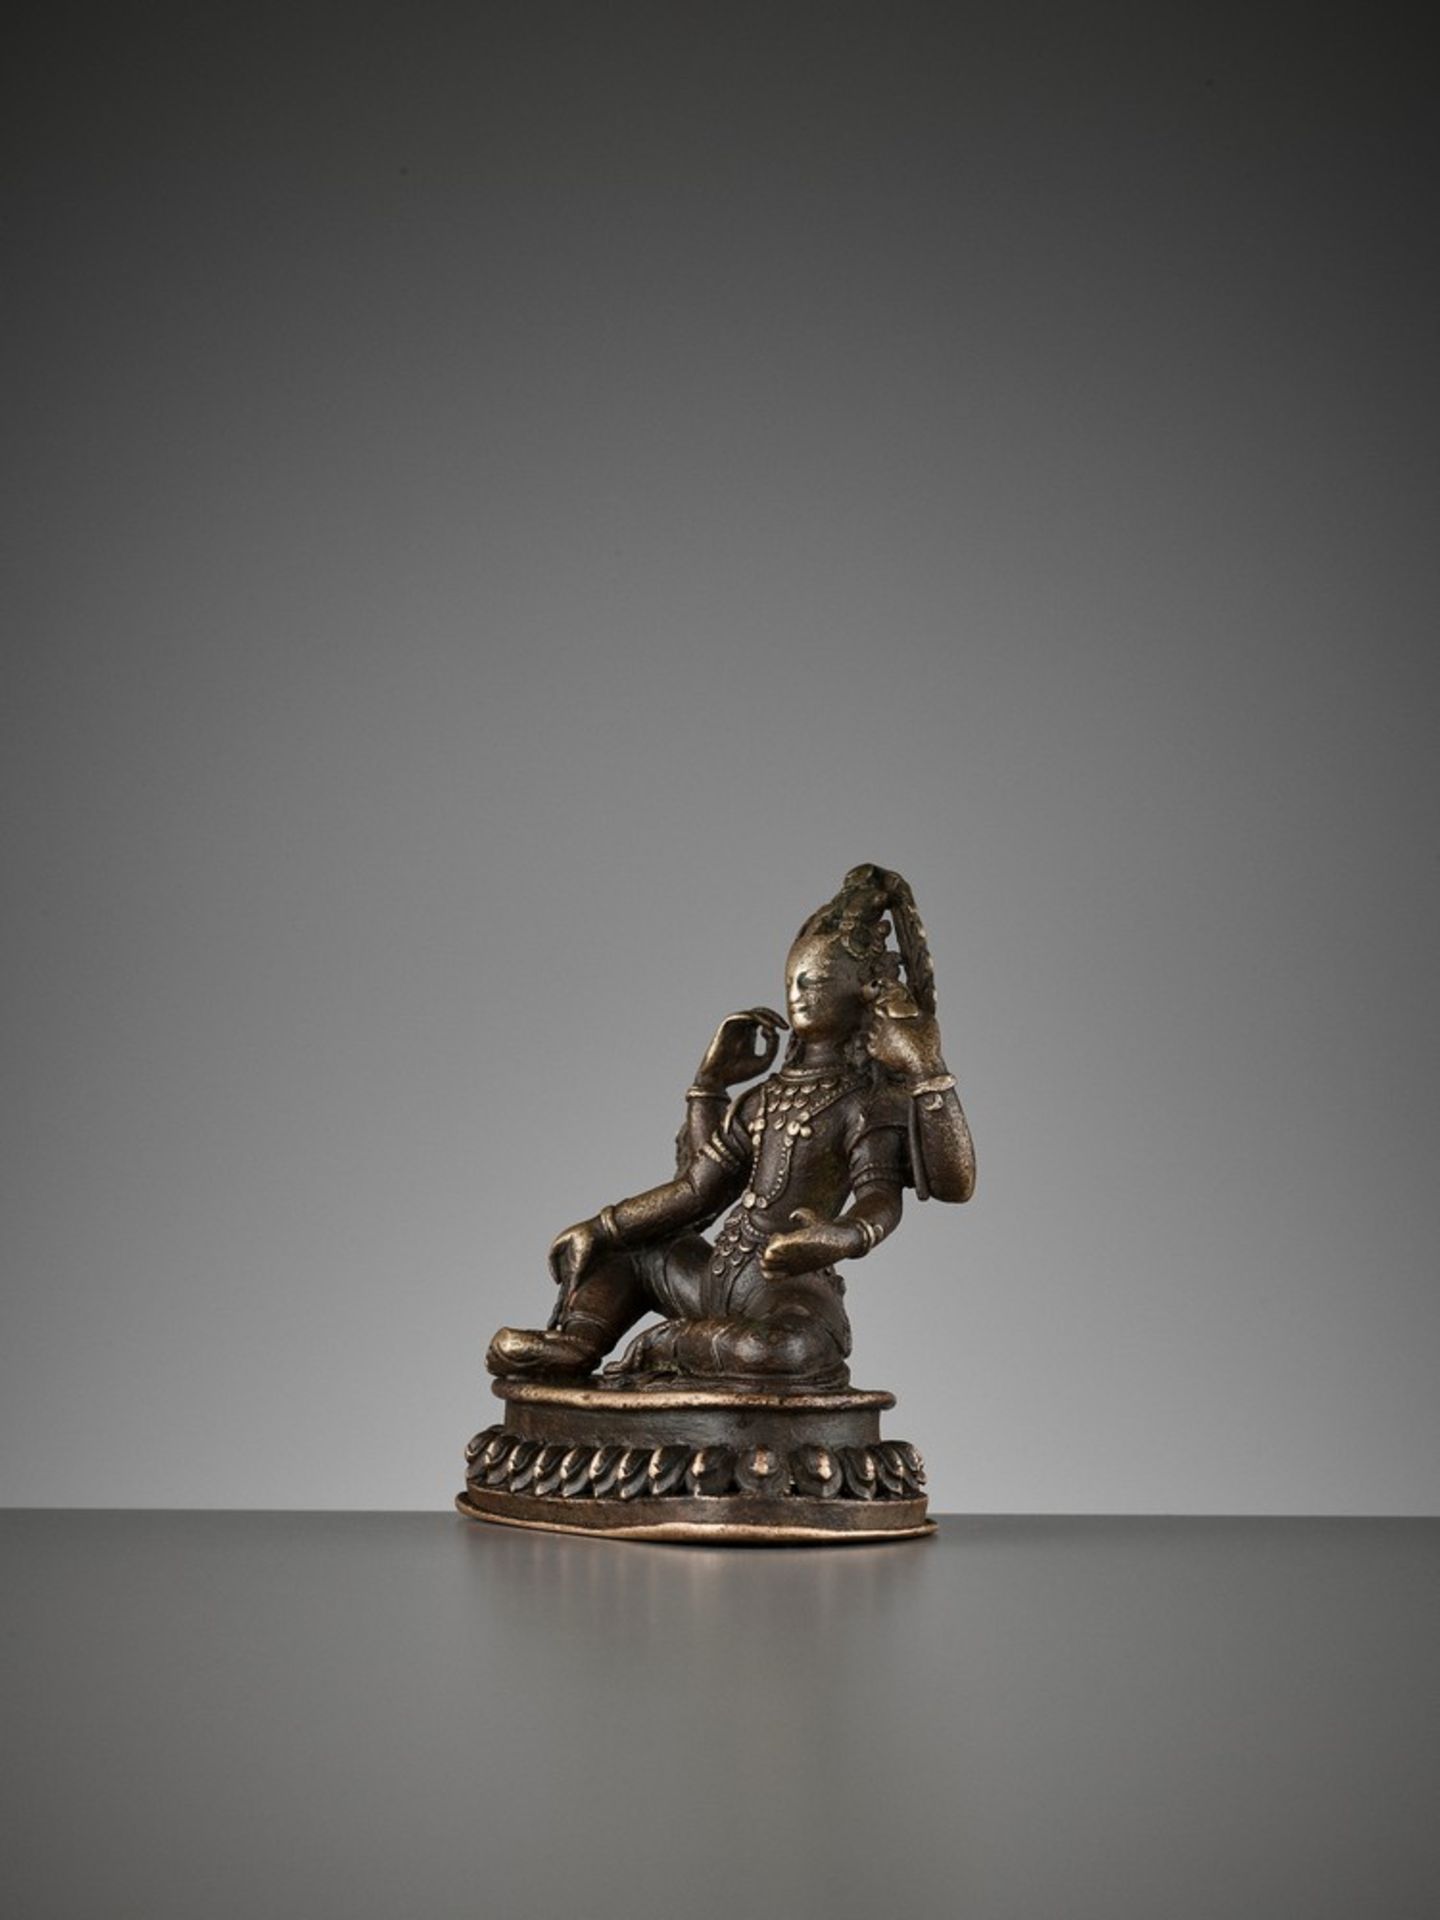 A SMALL BRONZE OF THE FOUR-ARMED AVALOKITESVARA, 15TH-16TH CENTURY - Image 4 of 11